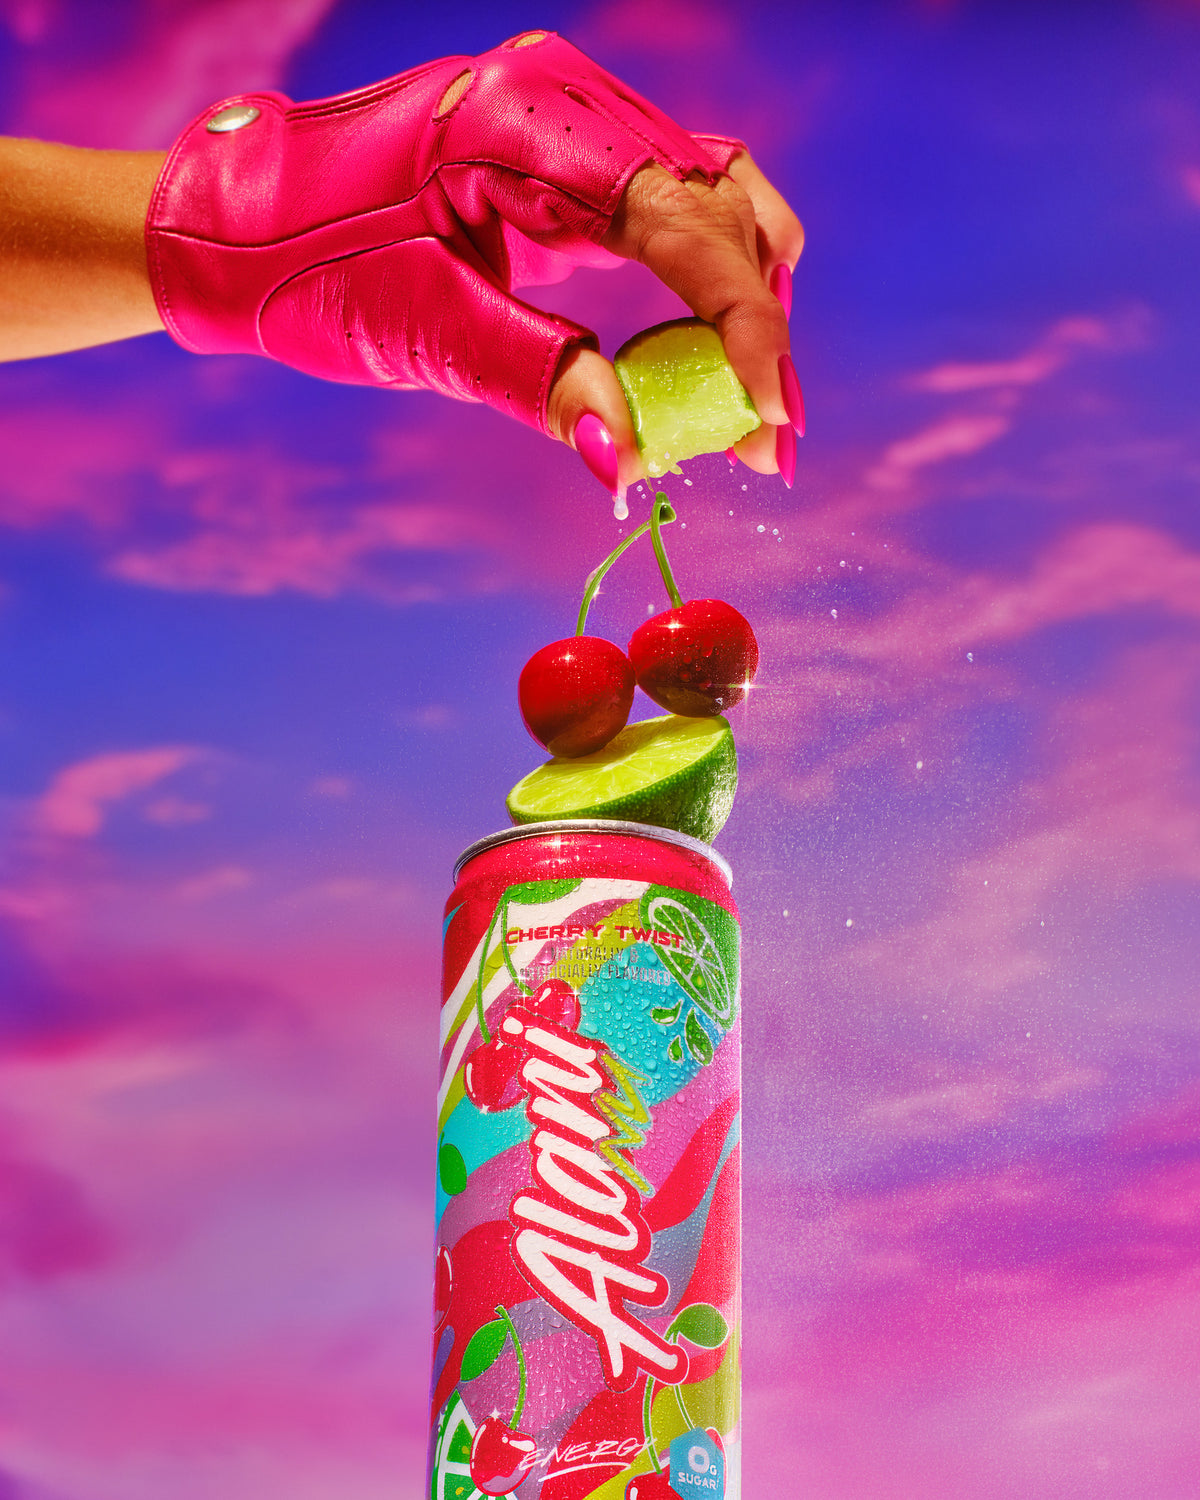  A gloved hand squeezes a lime over a can of Cherry Twist energy drink, adorned with cherries on top, against a dreamy sky backdrop with pink hues.